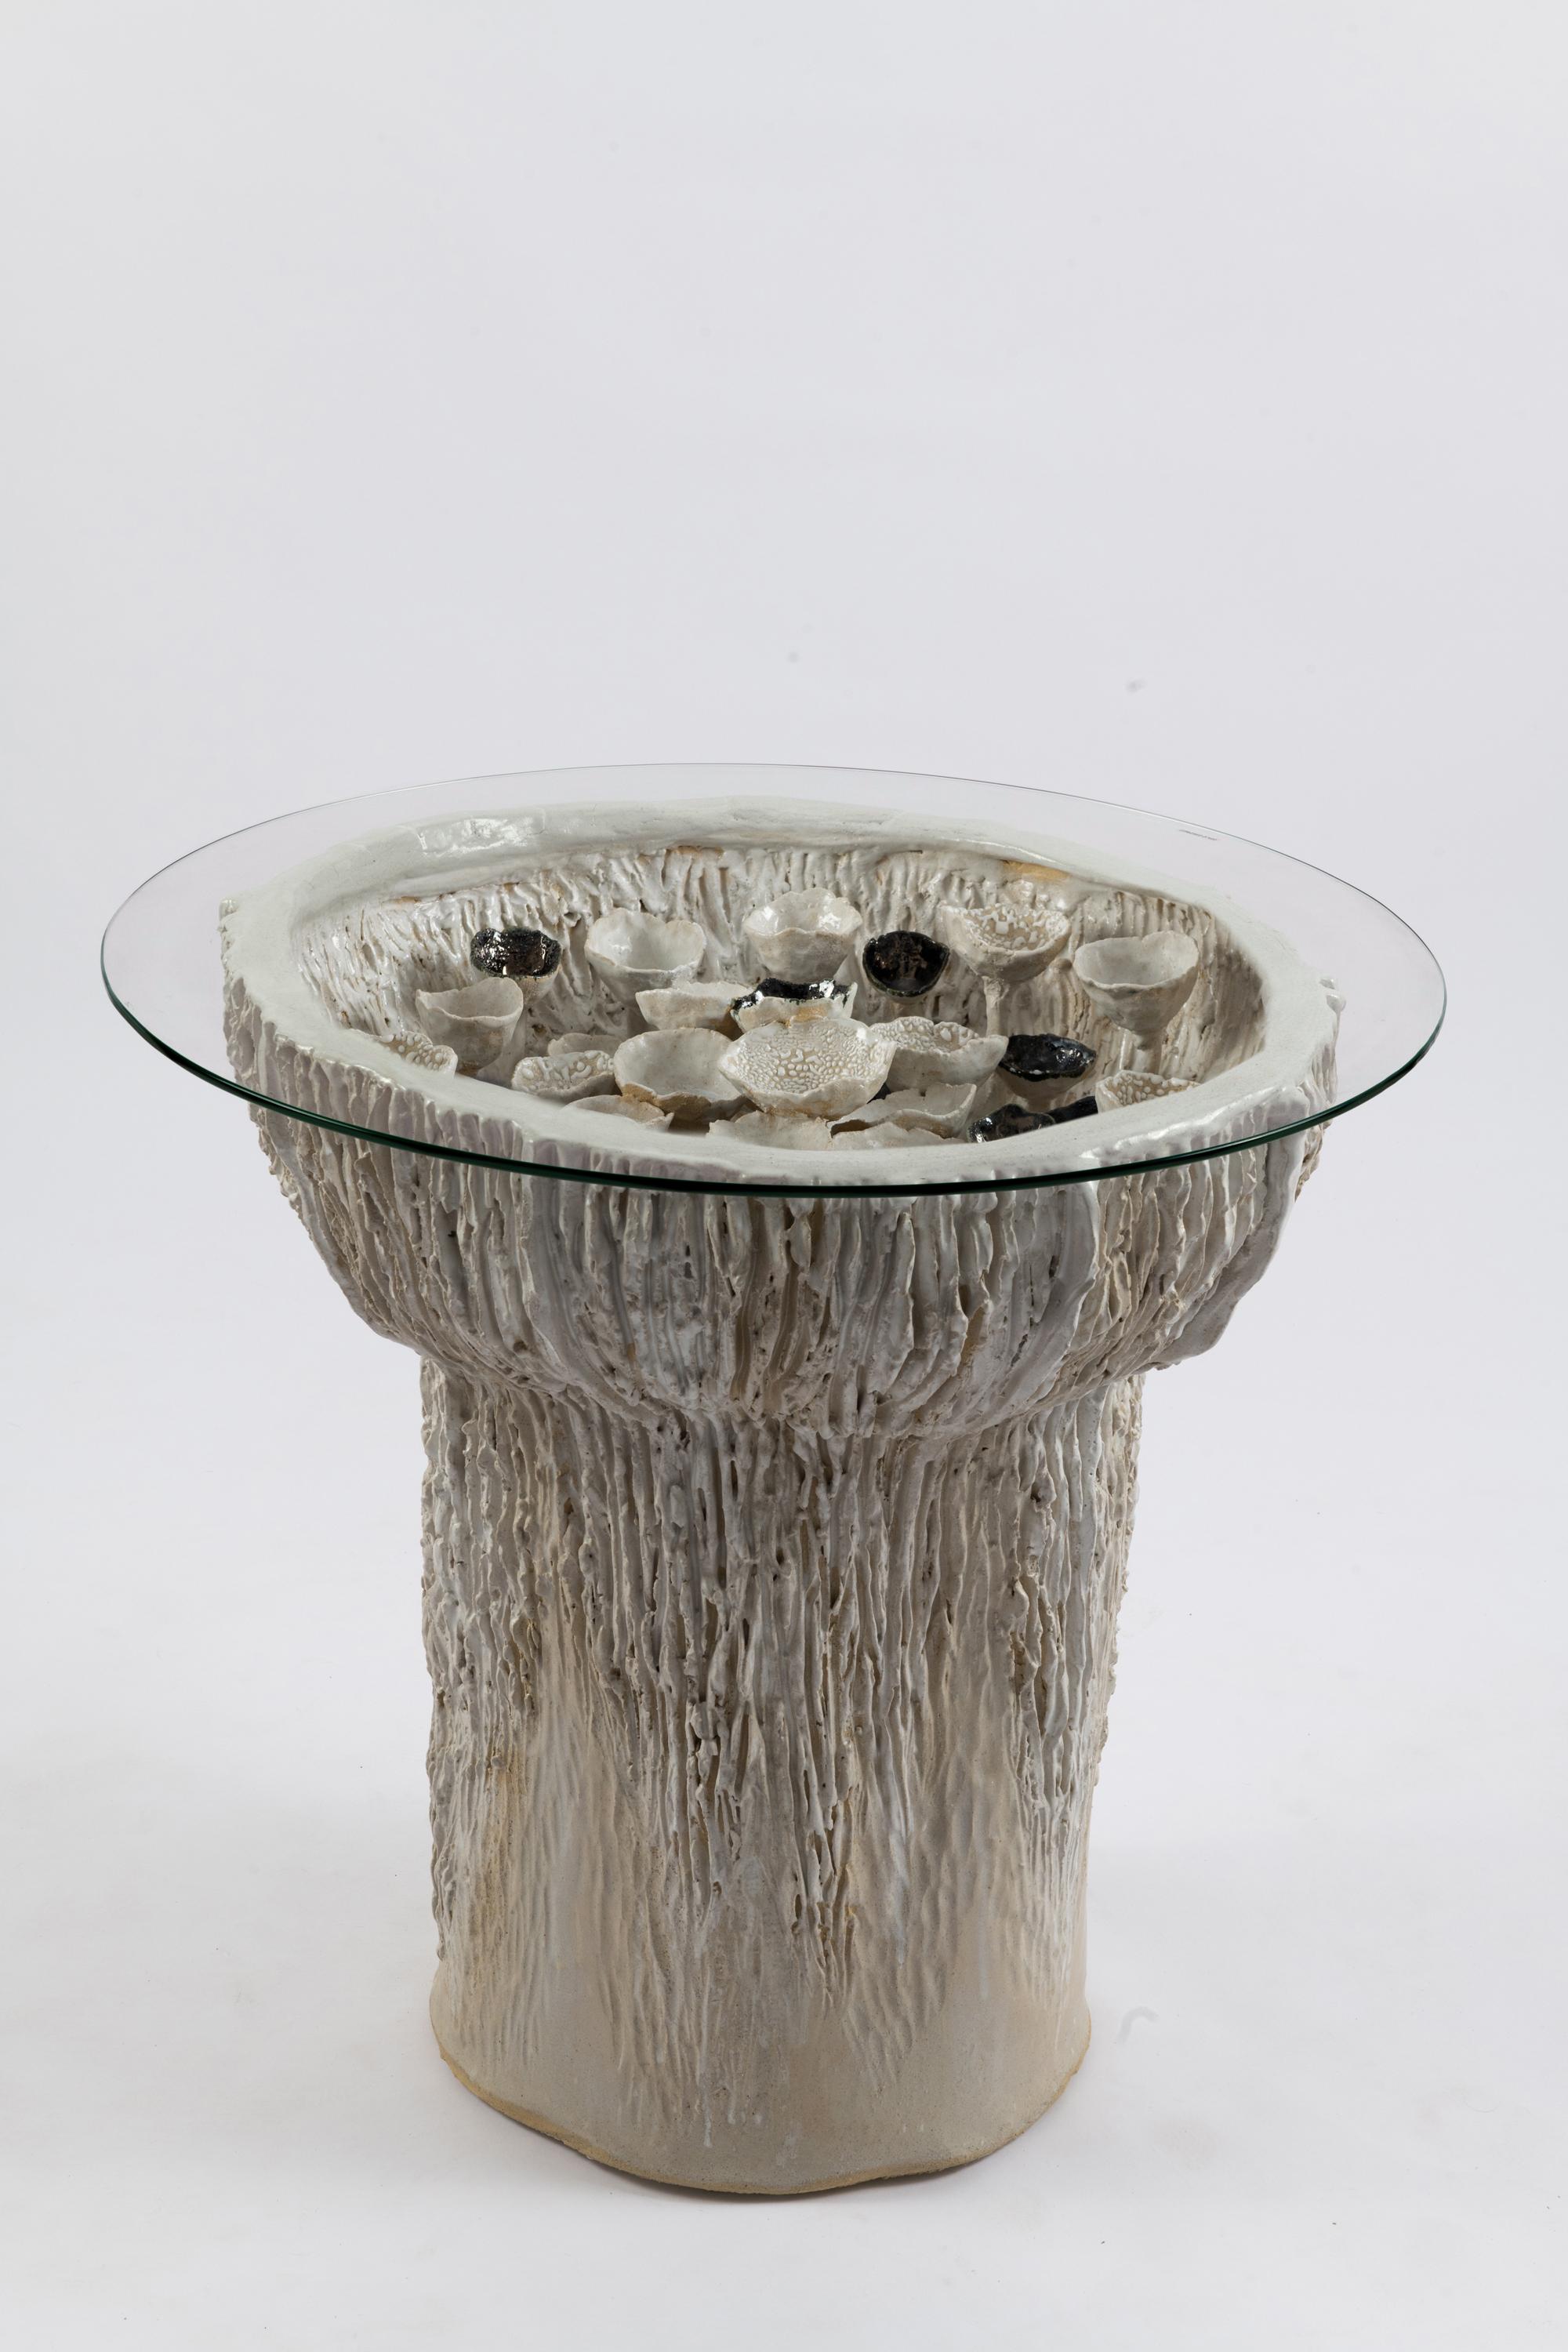 Trombetta Table, 2022
Glazed stoneware with glass top
Measures: 26 x 28 x 28 in 
Top: 28 x 28 in; Base: 25 x 25 in.